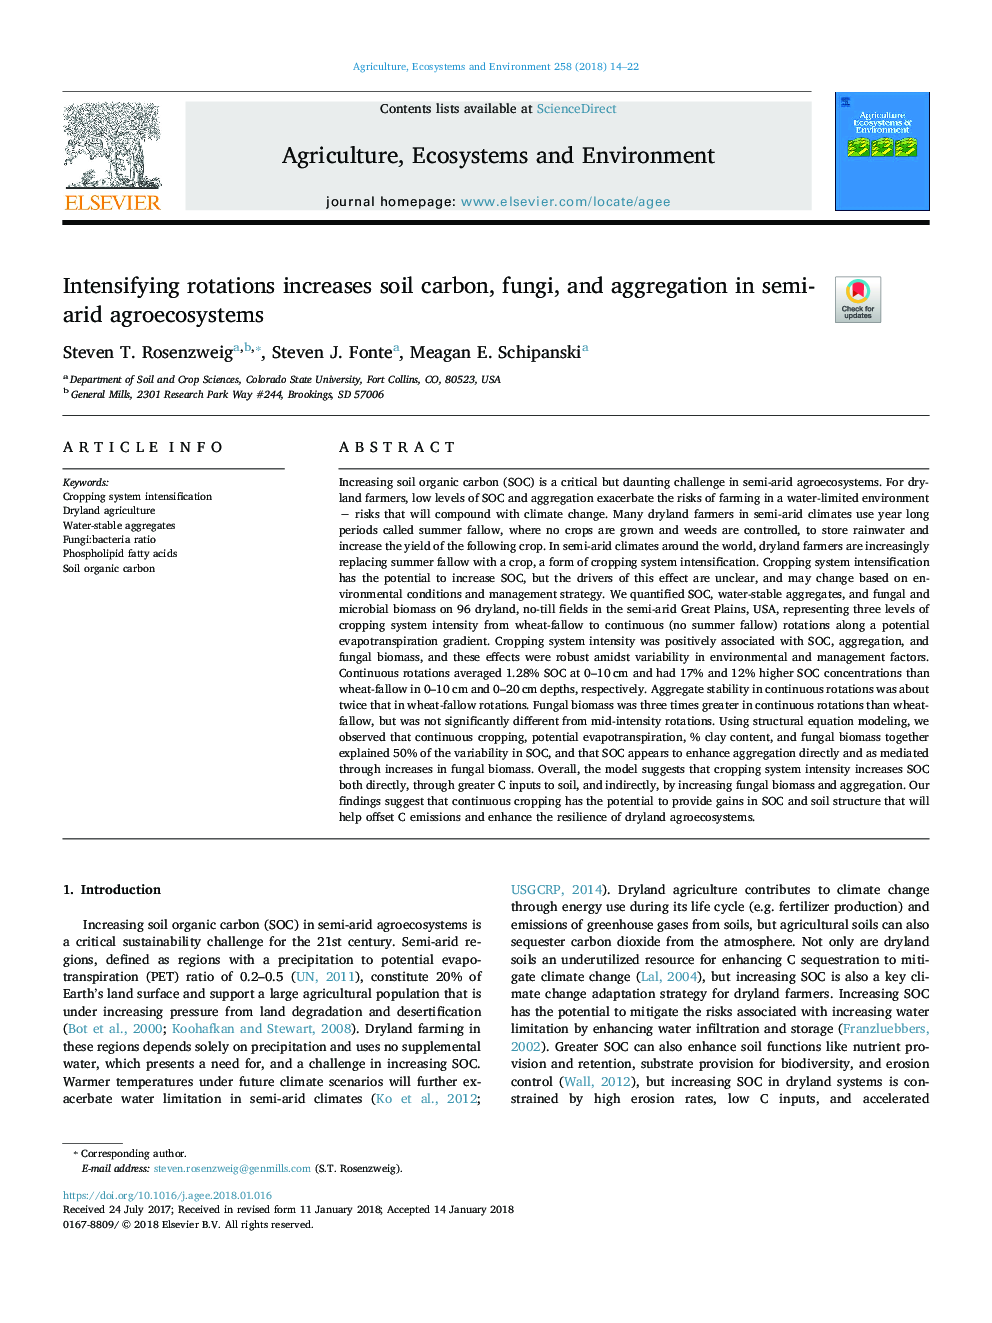 Intensifying rotations increases soil carbon, fungi, and aggregation in semi-arid agroecosystems